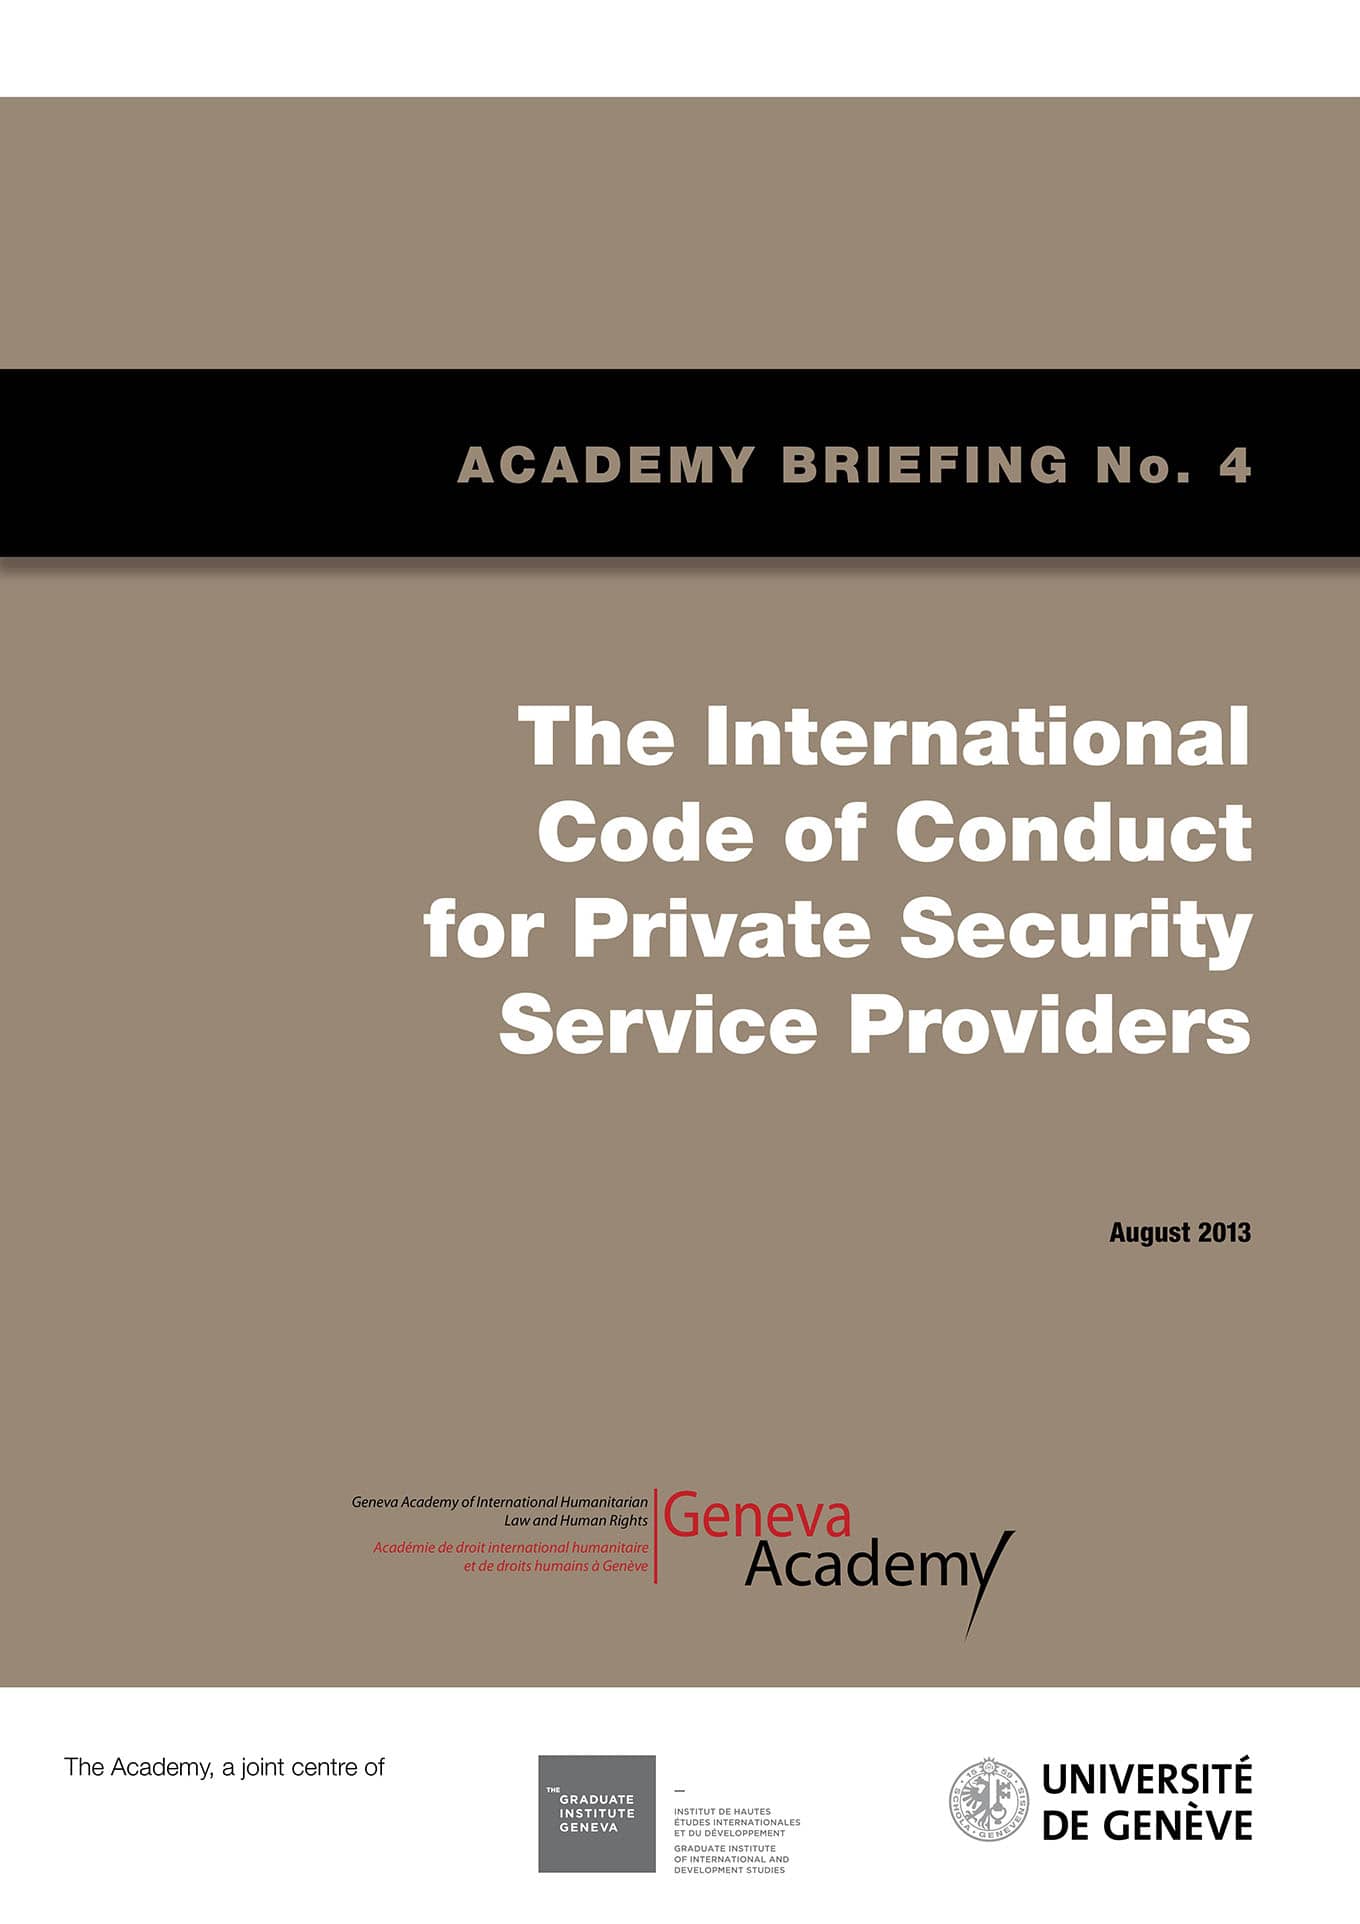 Academy Briefing No. 4 - The International Code of Conduct for Private Security Service Providers (ICoC)